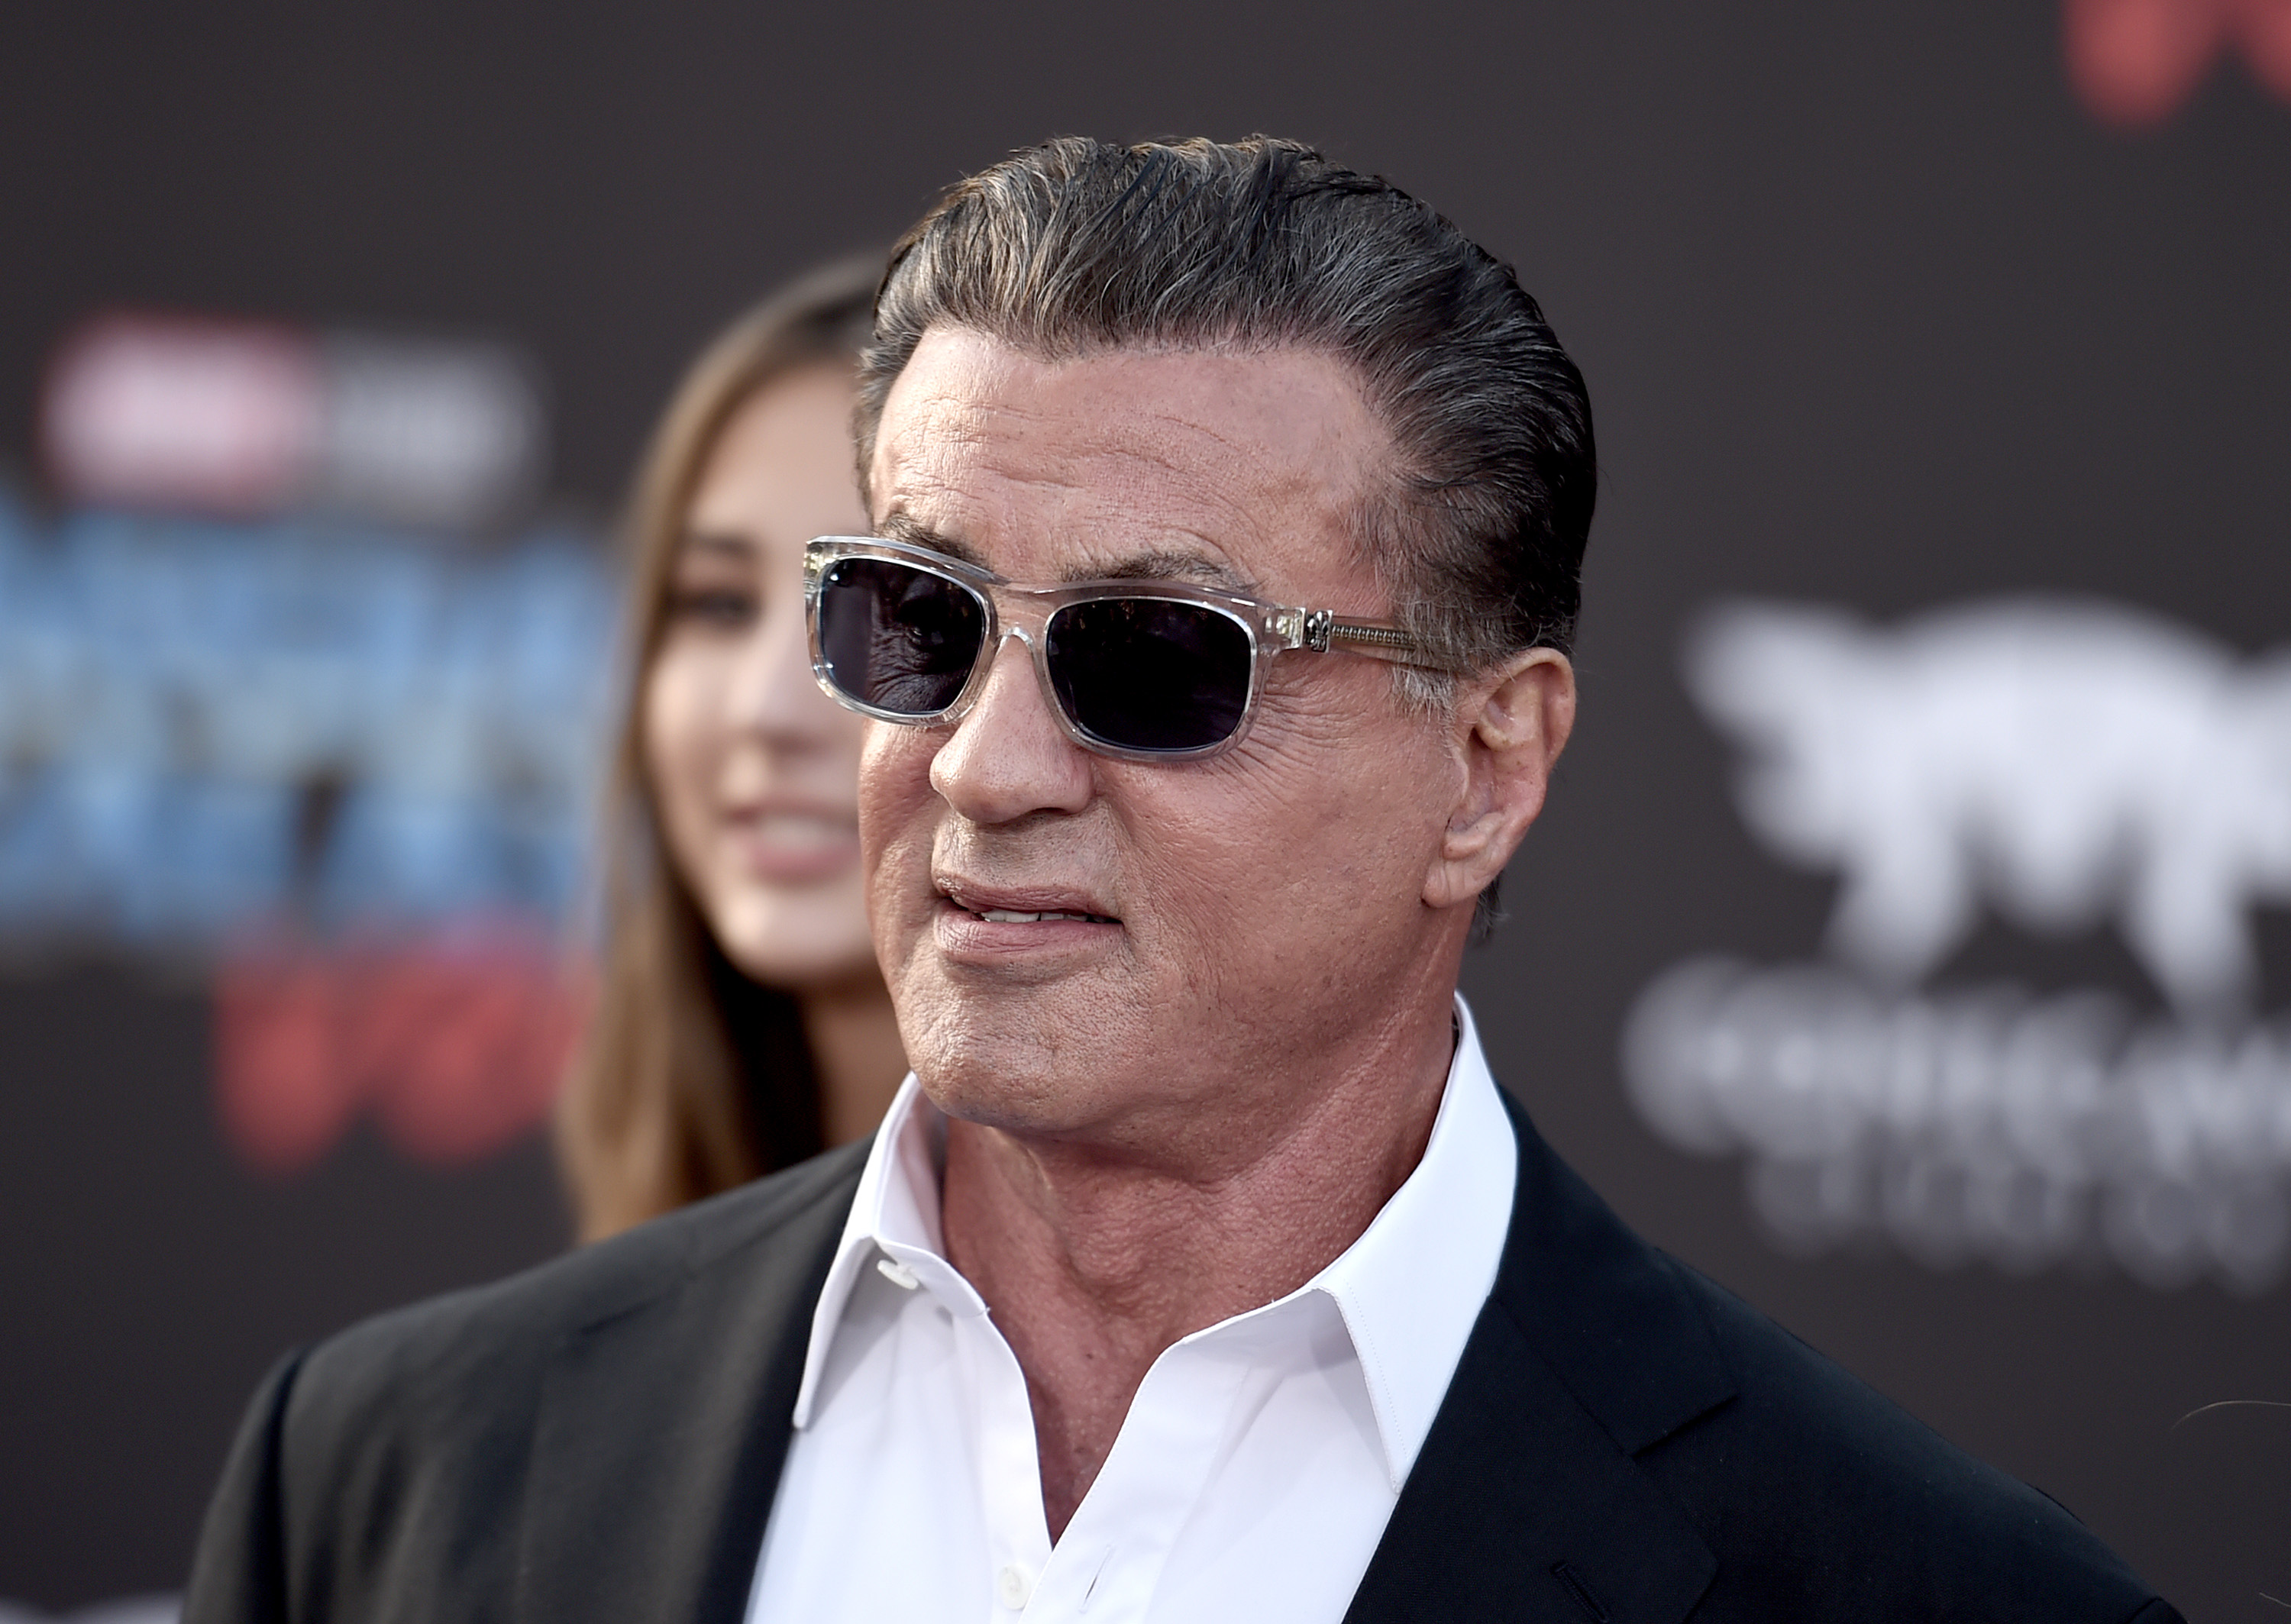 Mandatory Credit: Photo by Richard Shotwell/REX/Shutterstock (8618784eh) Sylvester Stallone 'Guardians of the Galaxy Vol. 2' film premiere, Arrivals, Los Angeles, USA - 19 Apr 2017